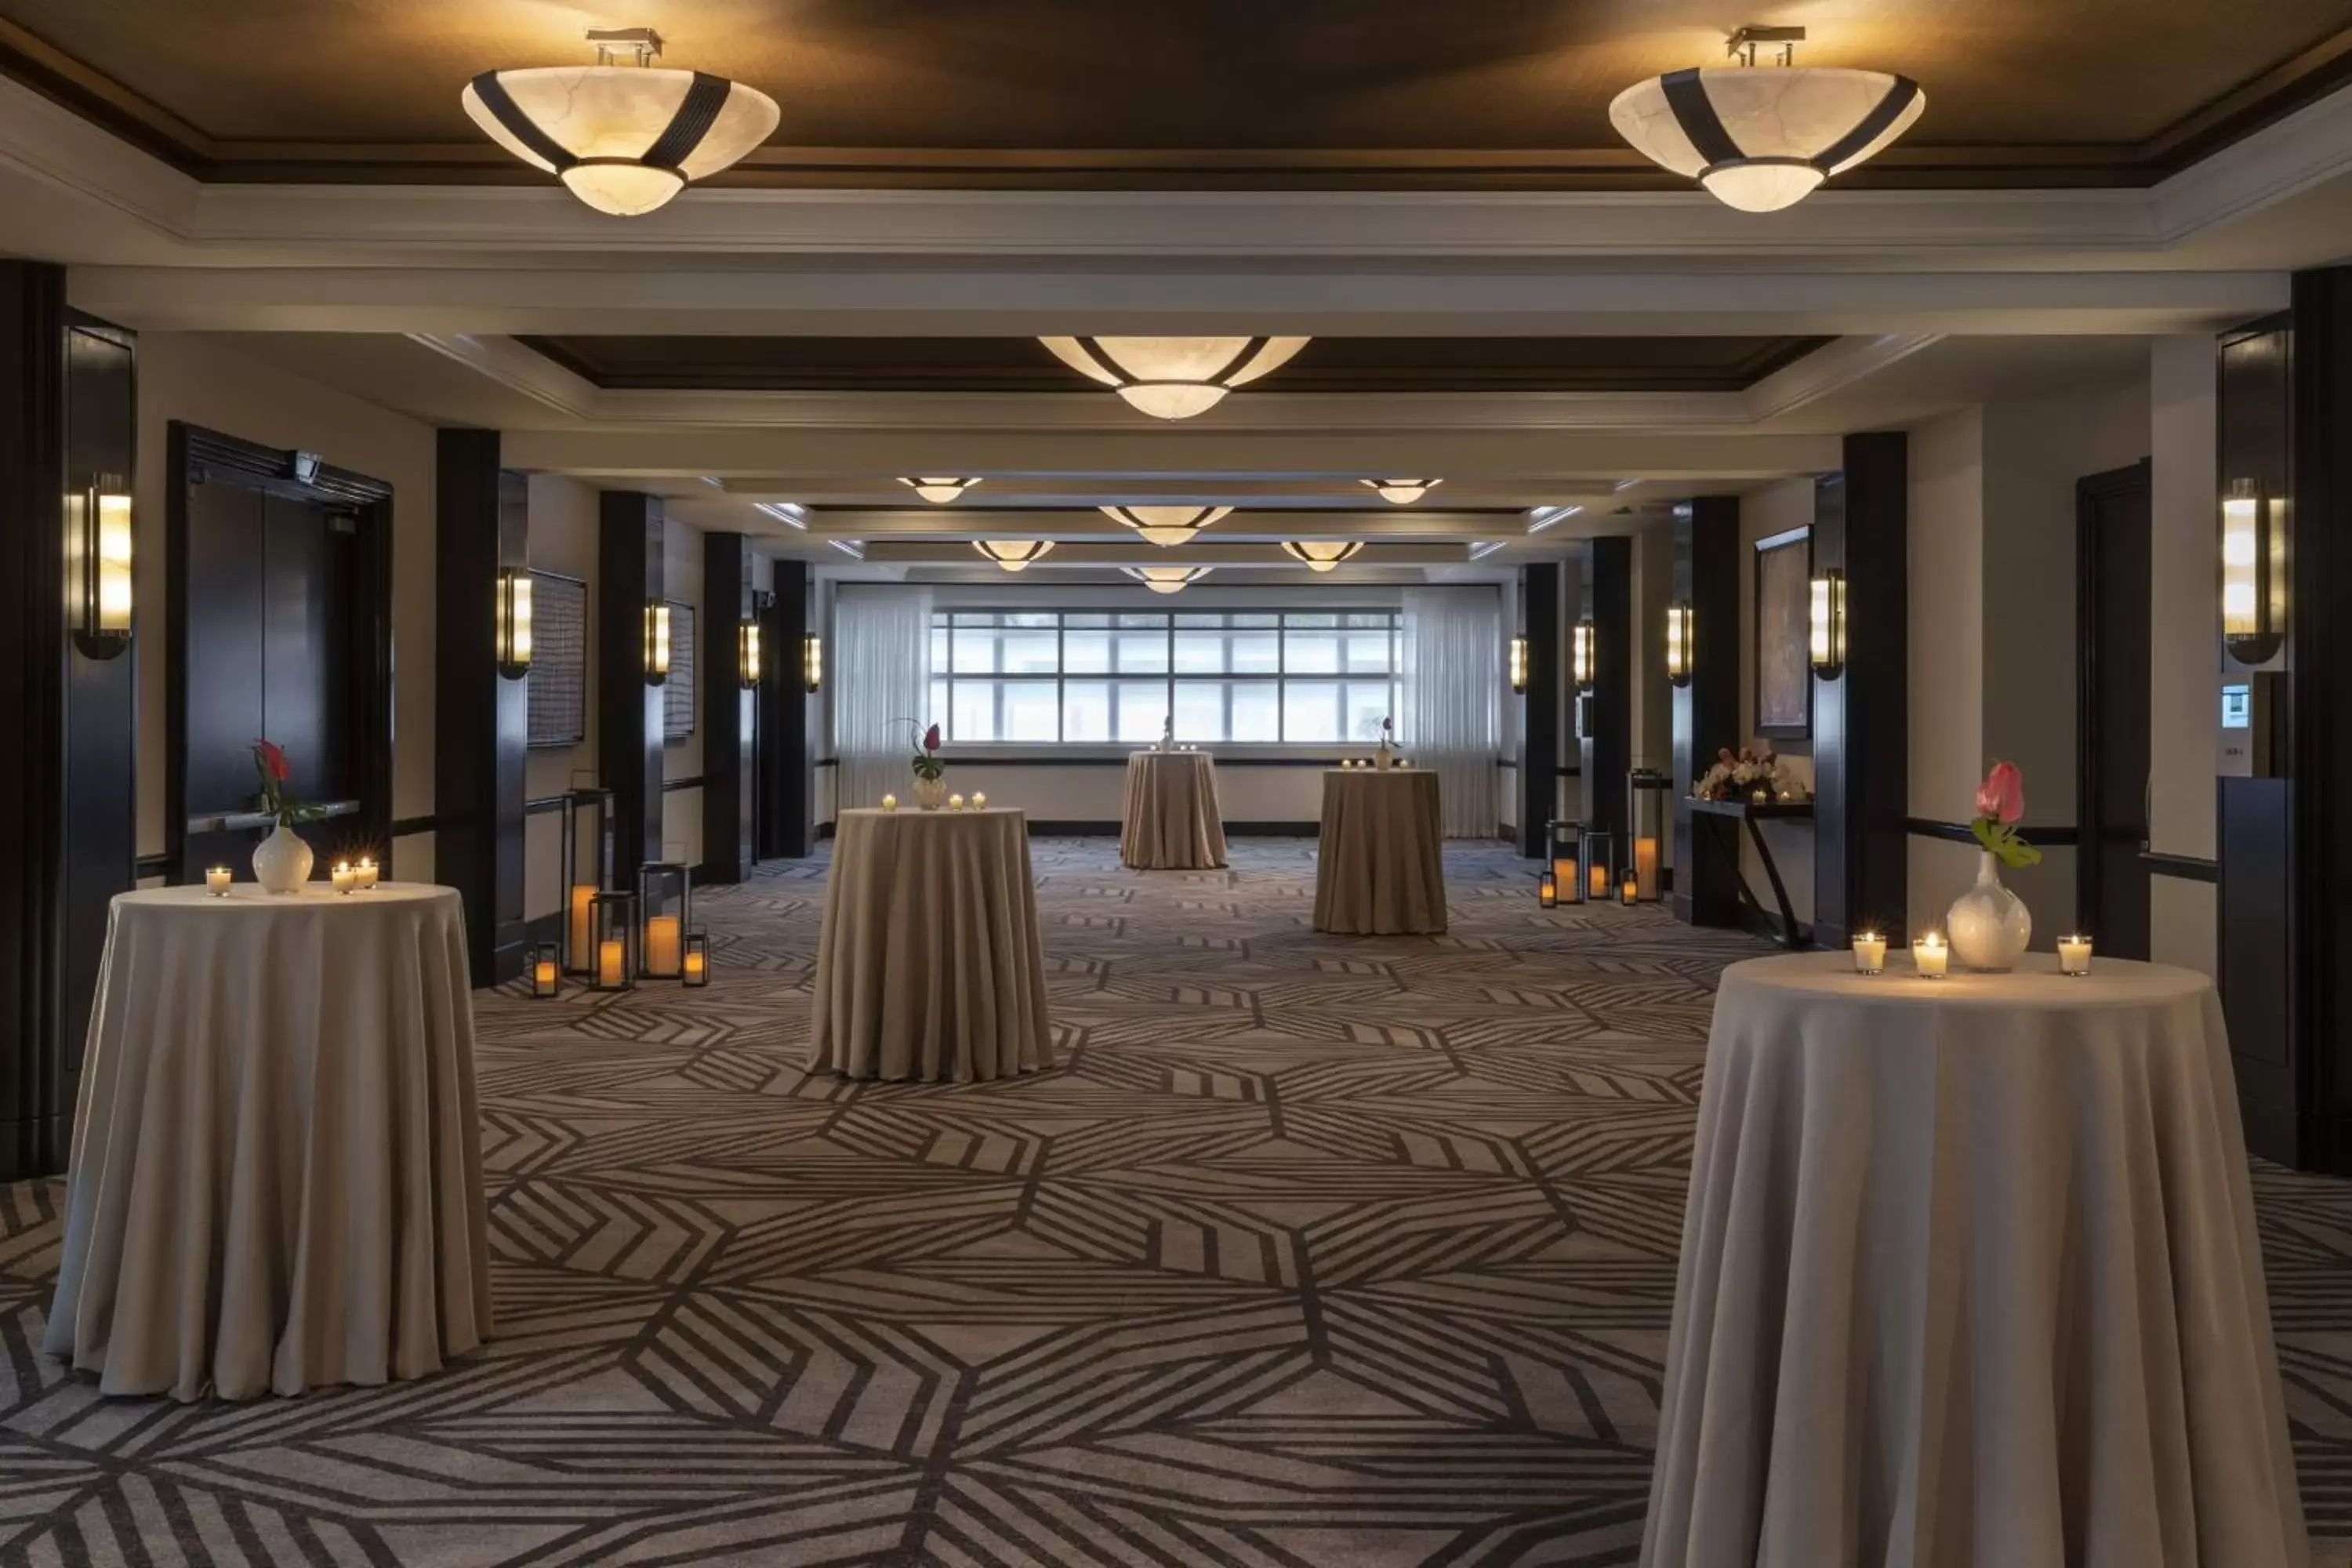 Meeting/conference room, Banquet Facilities in The Ritz-Carlton South Beach